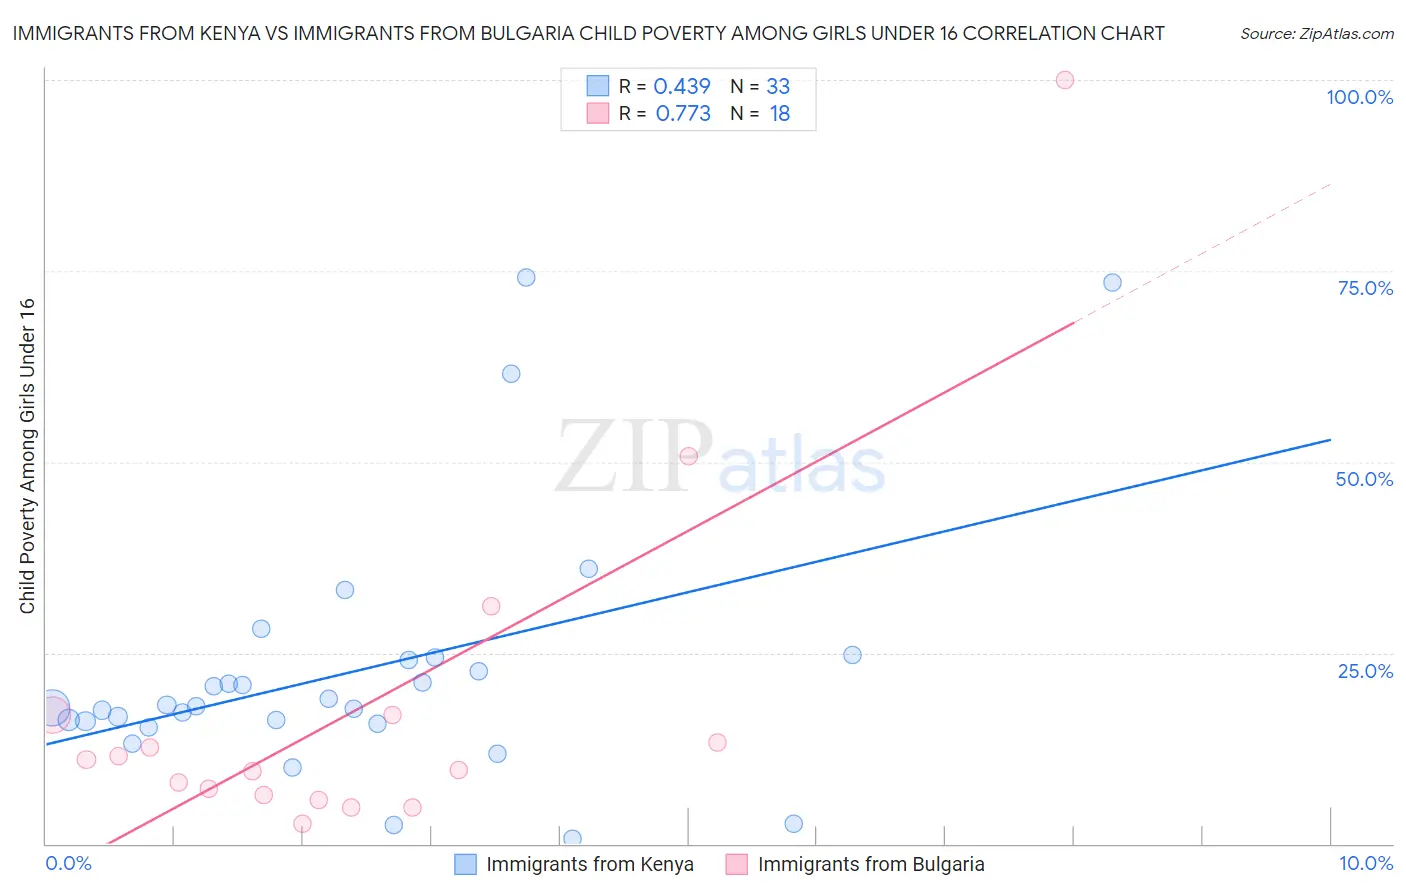 Immigrants from Kenya vs Immigrants from Bulgaria Child Poverty Among Girls Under 16